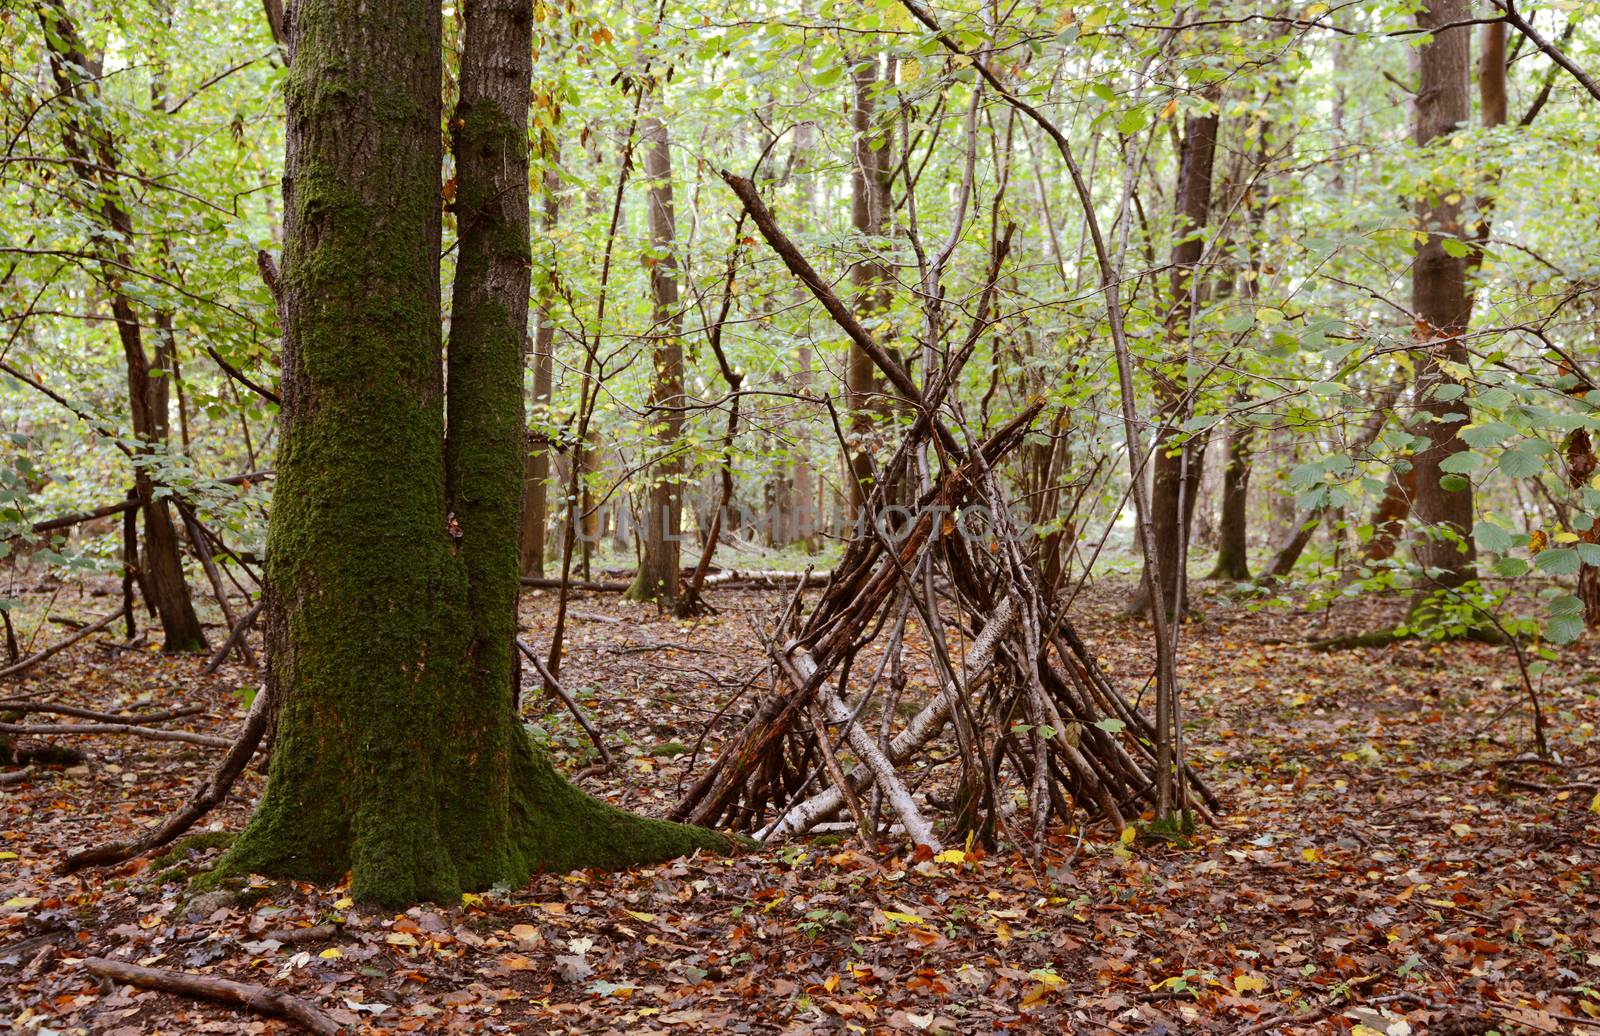 Improvised wigwam shelter built from fallen branches among mossy trees in an autumnal forest